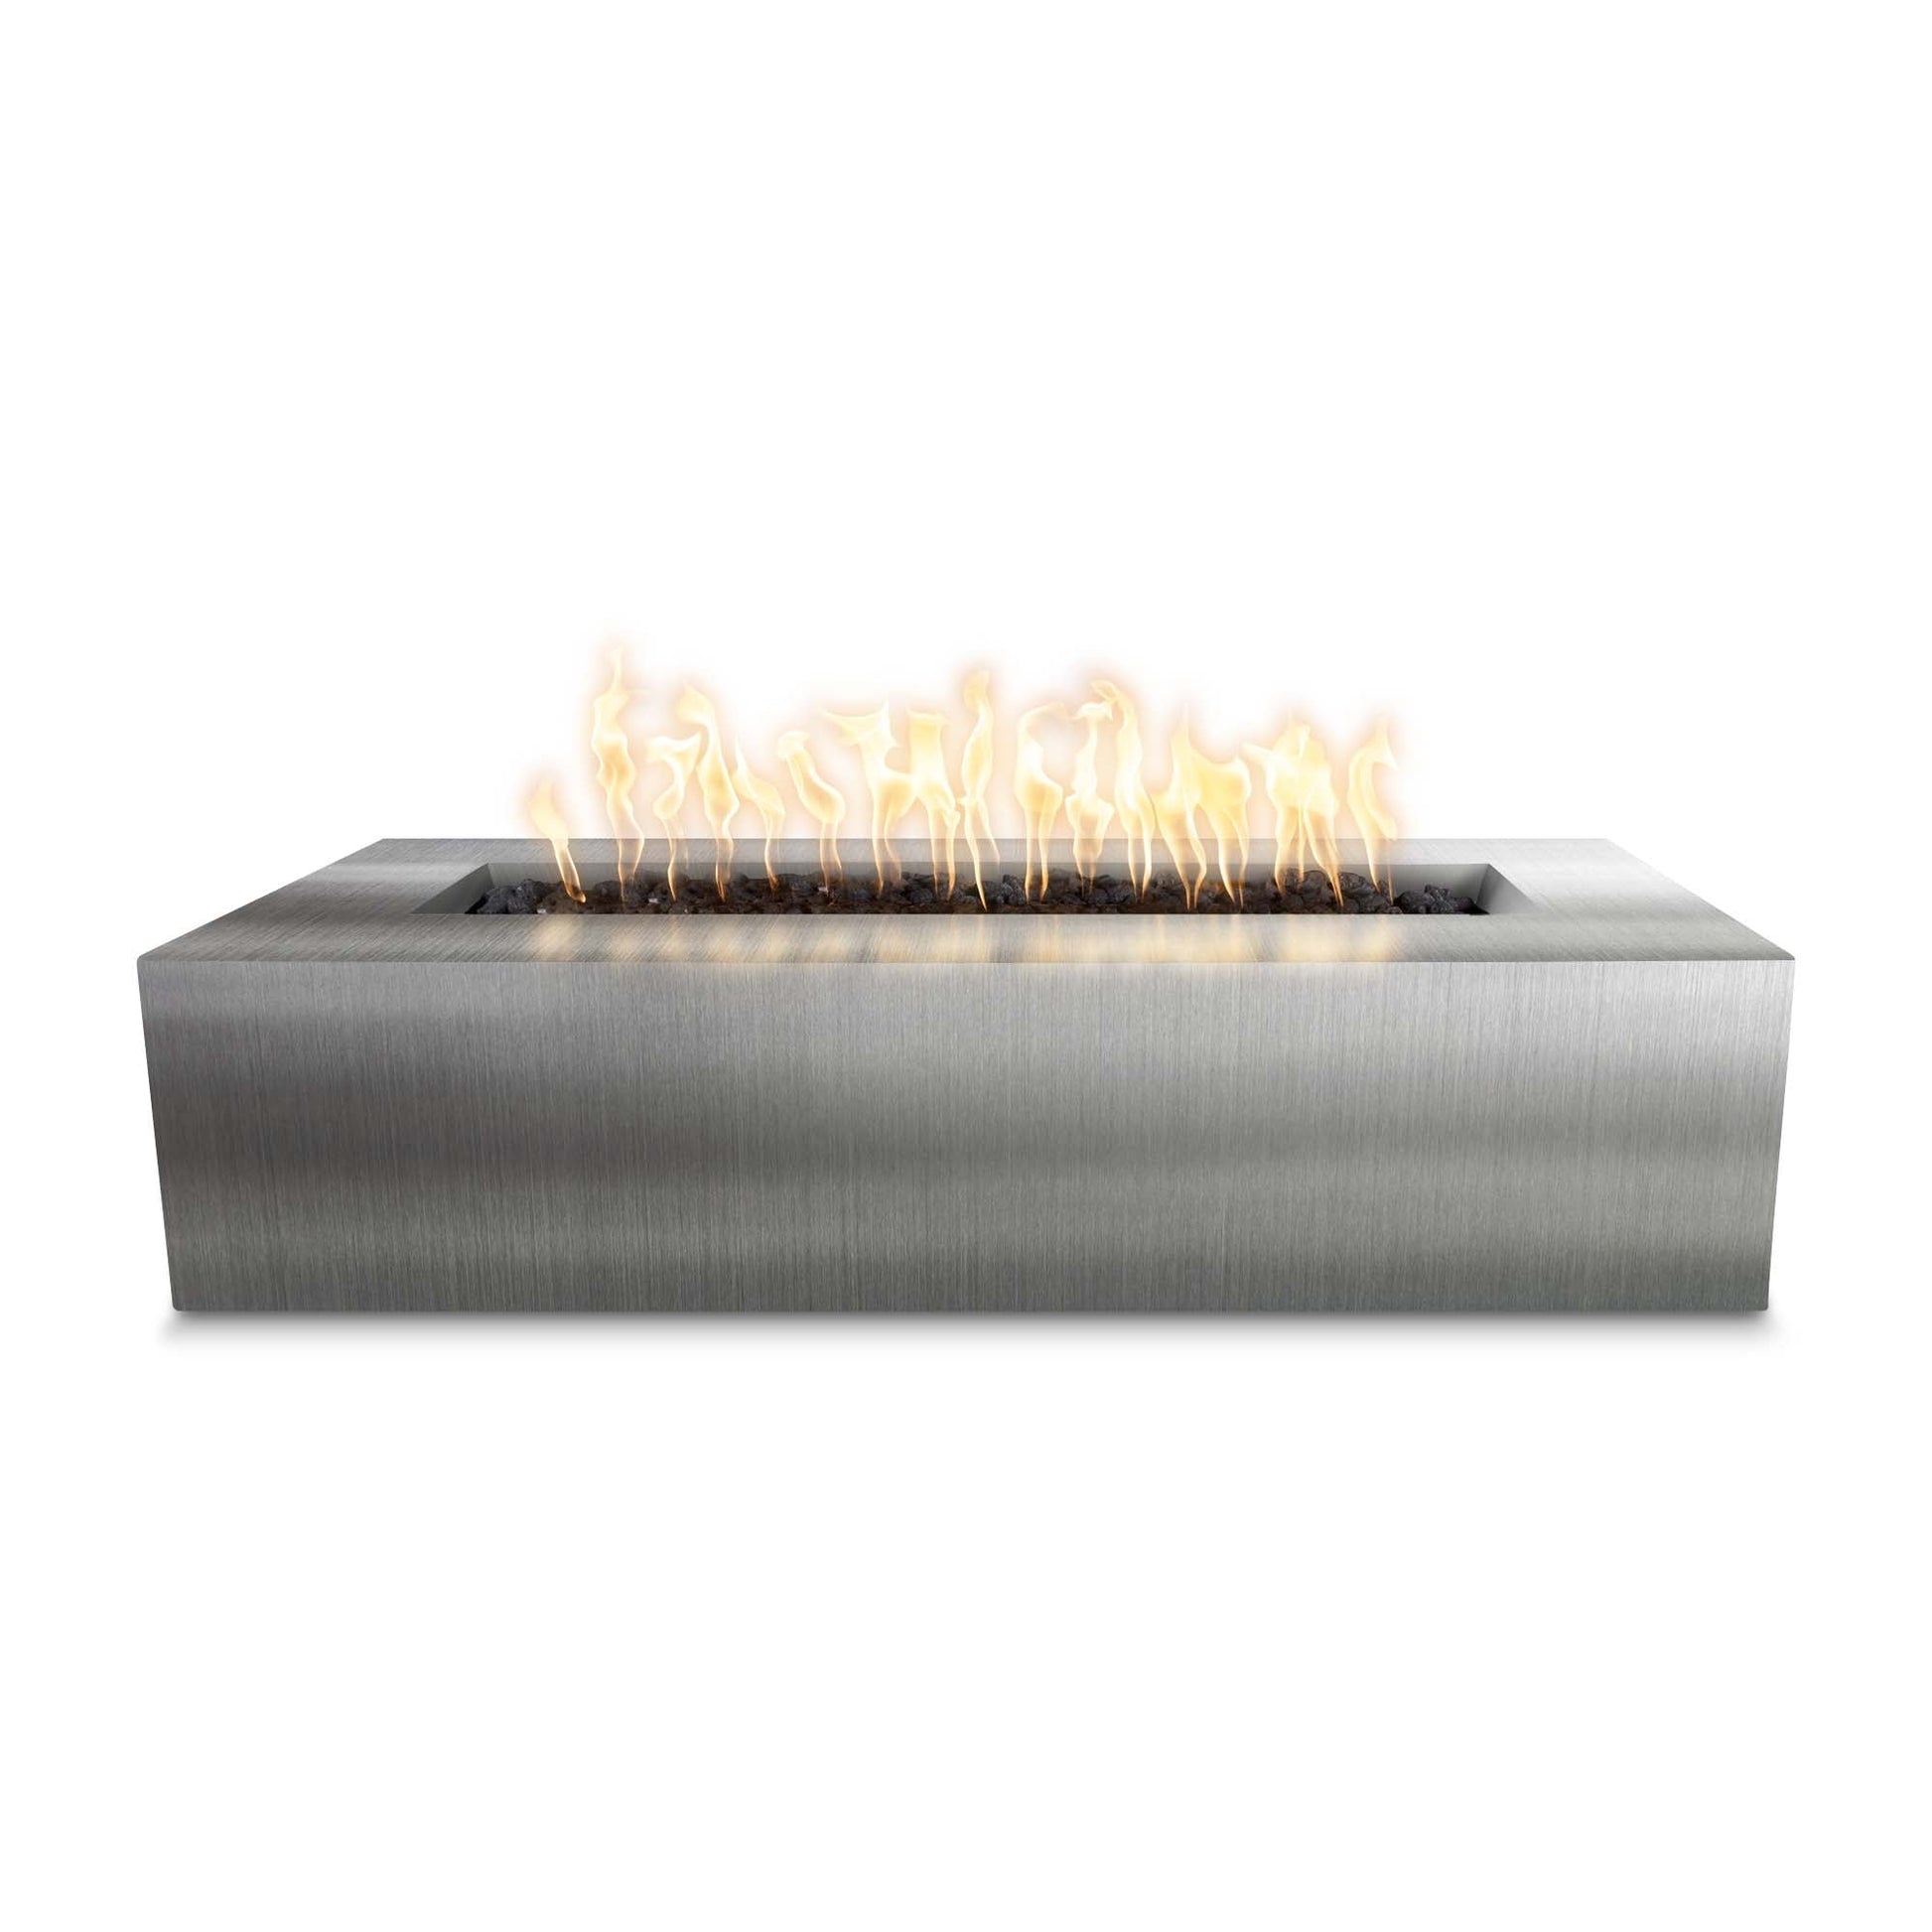 The Outdoor Plus Rectangular Regal 60" Hammered Copper Liquid Propane Fire Pit with 12V Electronic Ignition